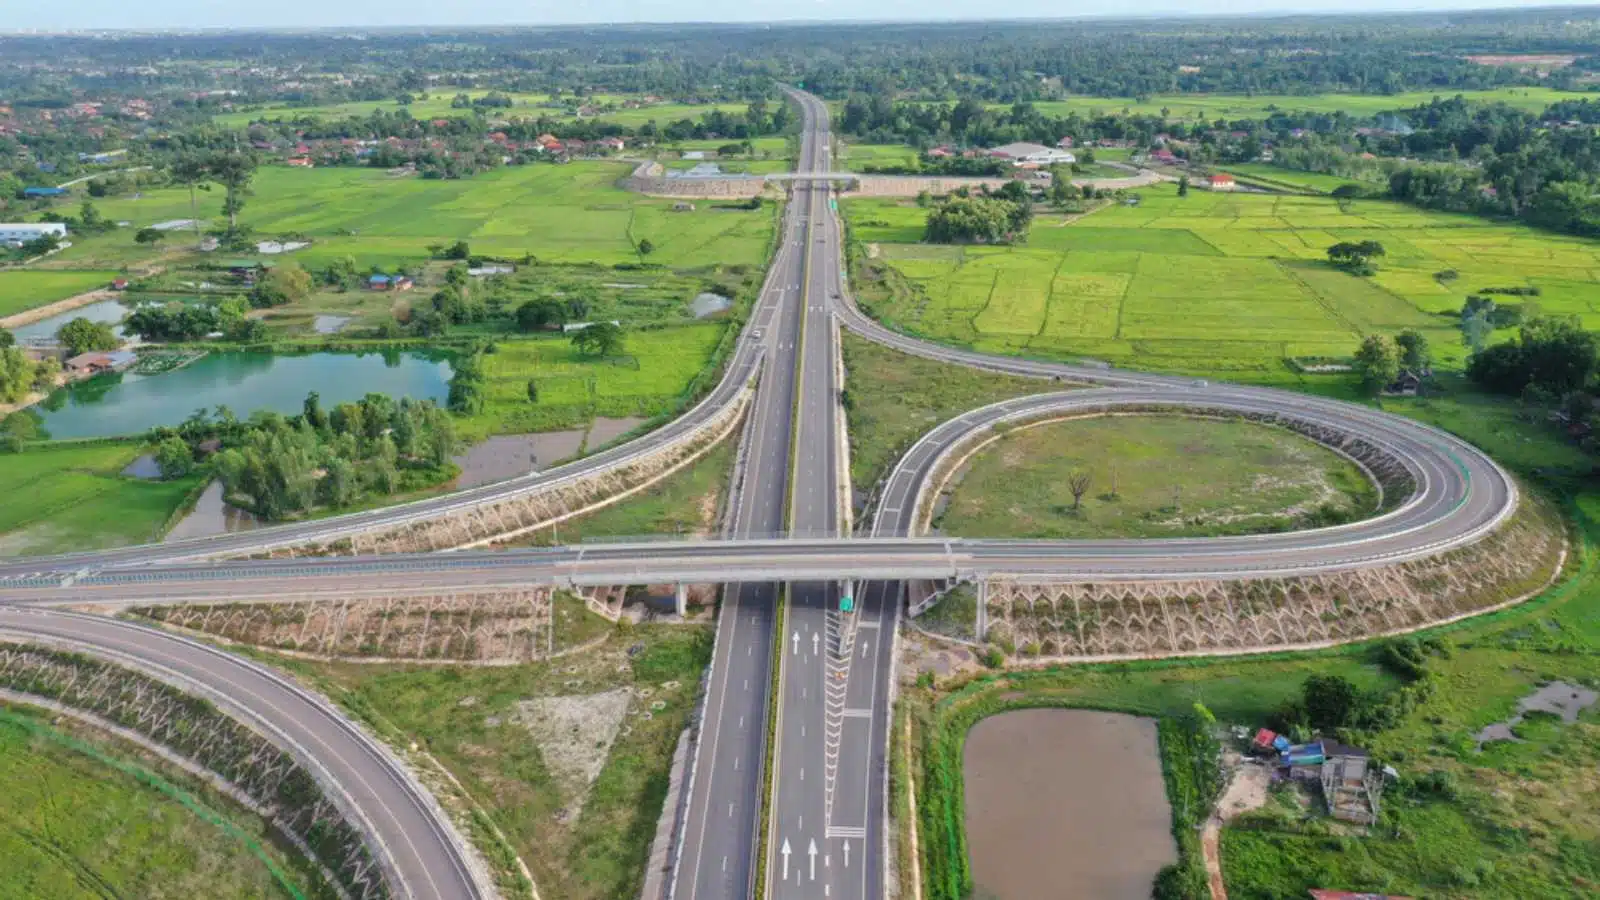 Aerial photo shows a view of the Vientiane-Vangvieng section of the China-Laos expressway in Vientiane, Laos